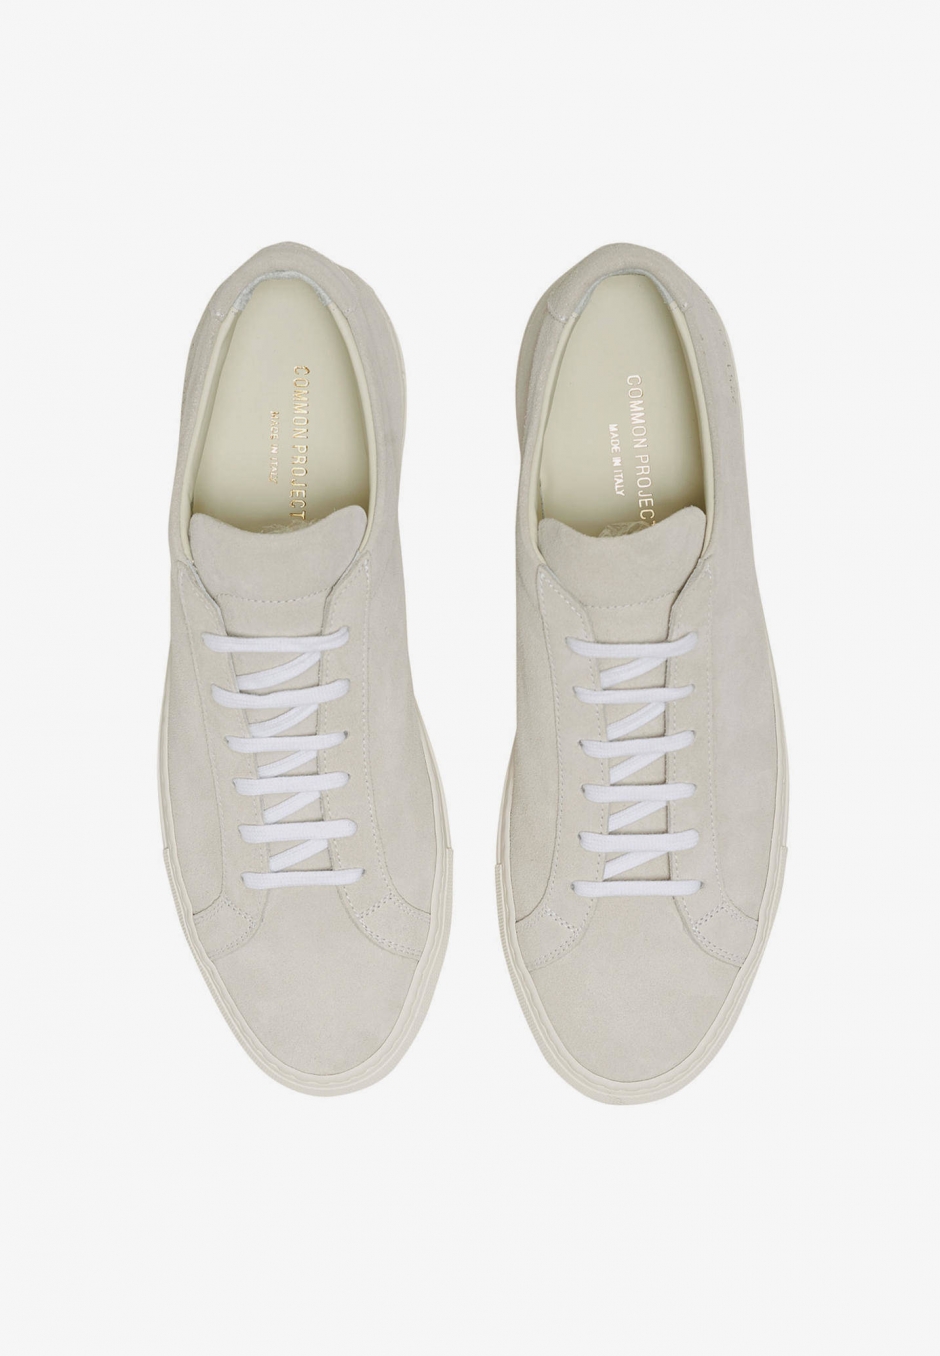 Common Projects Orginal Achilles Suede Off White